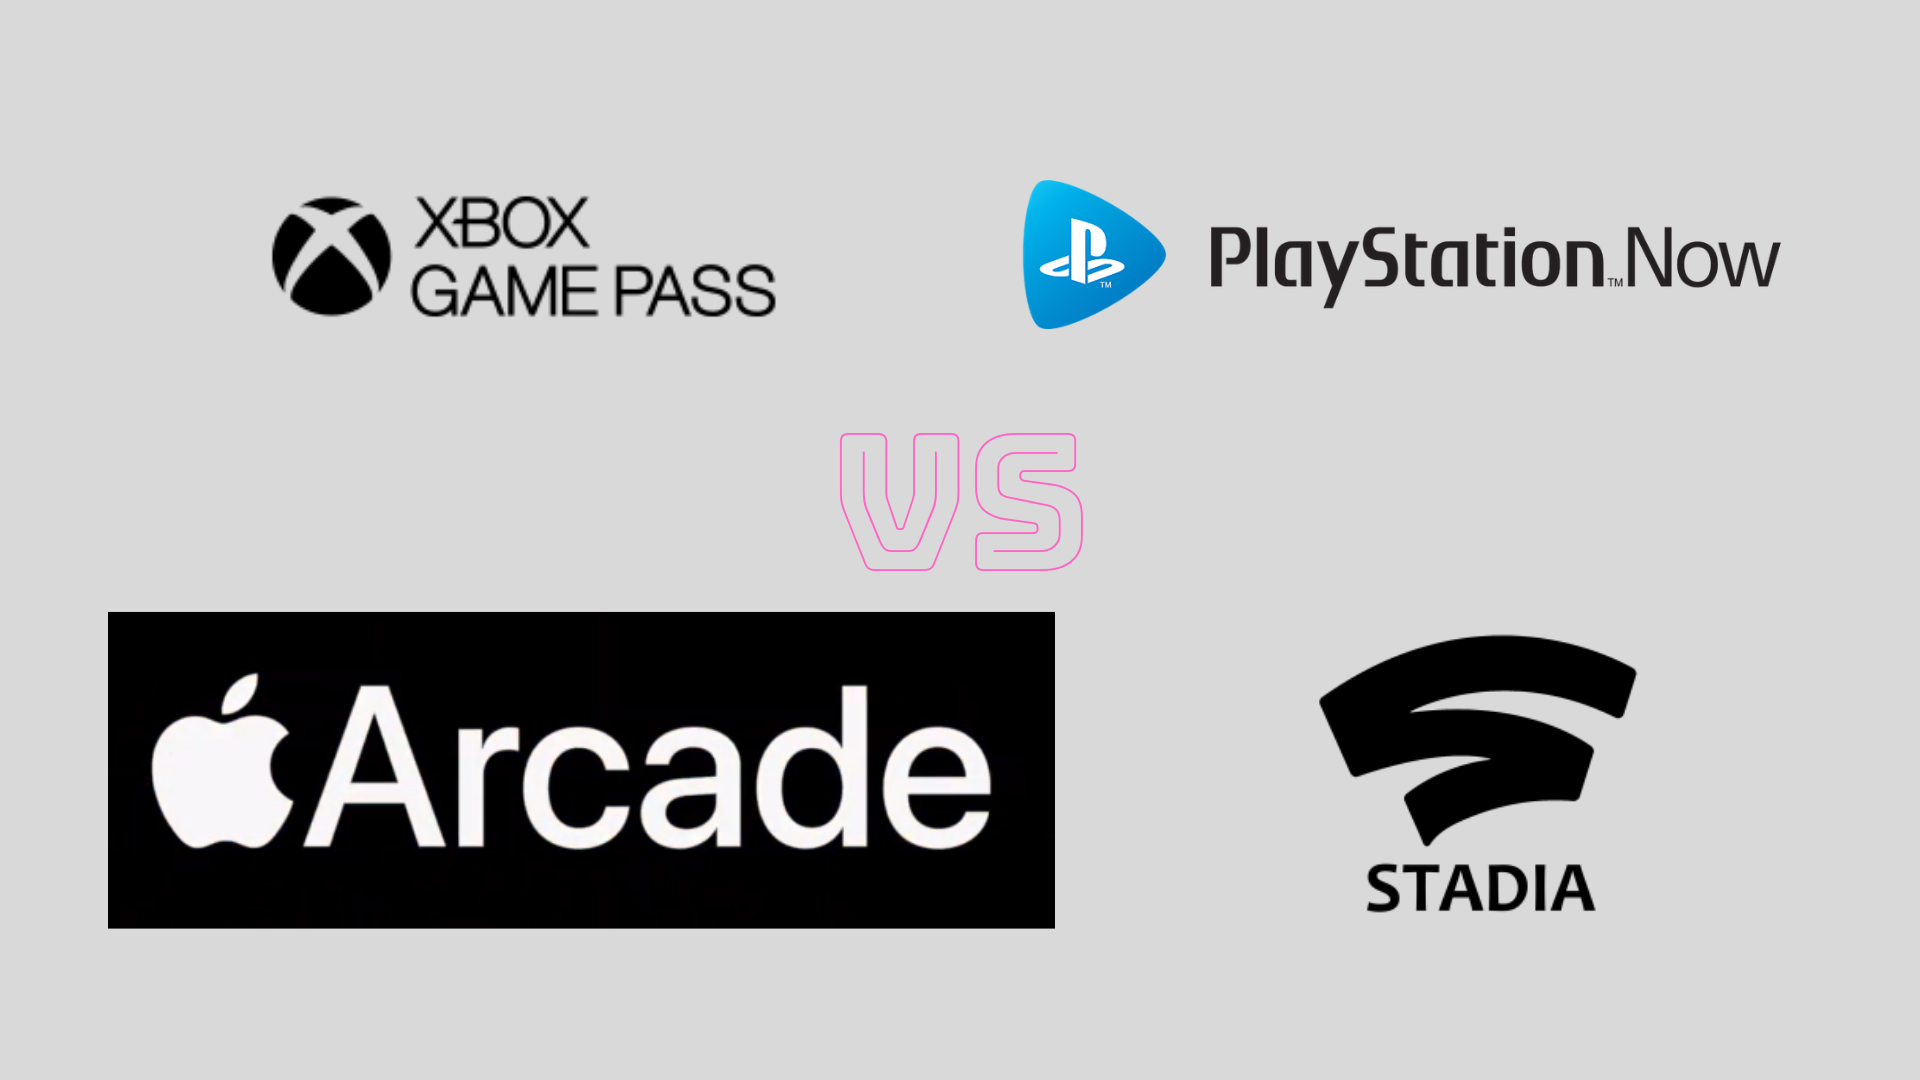 Xbox Game Pass vs PlayStation Now: Which Service is Better?